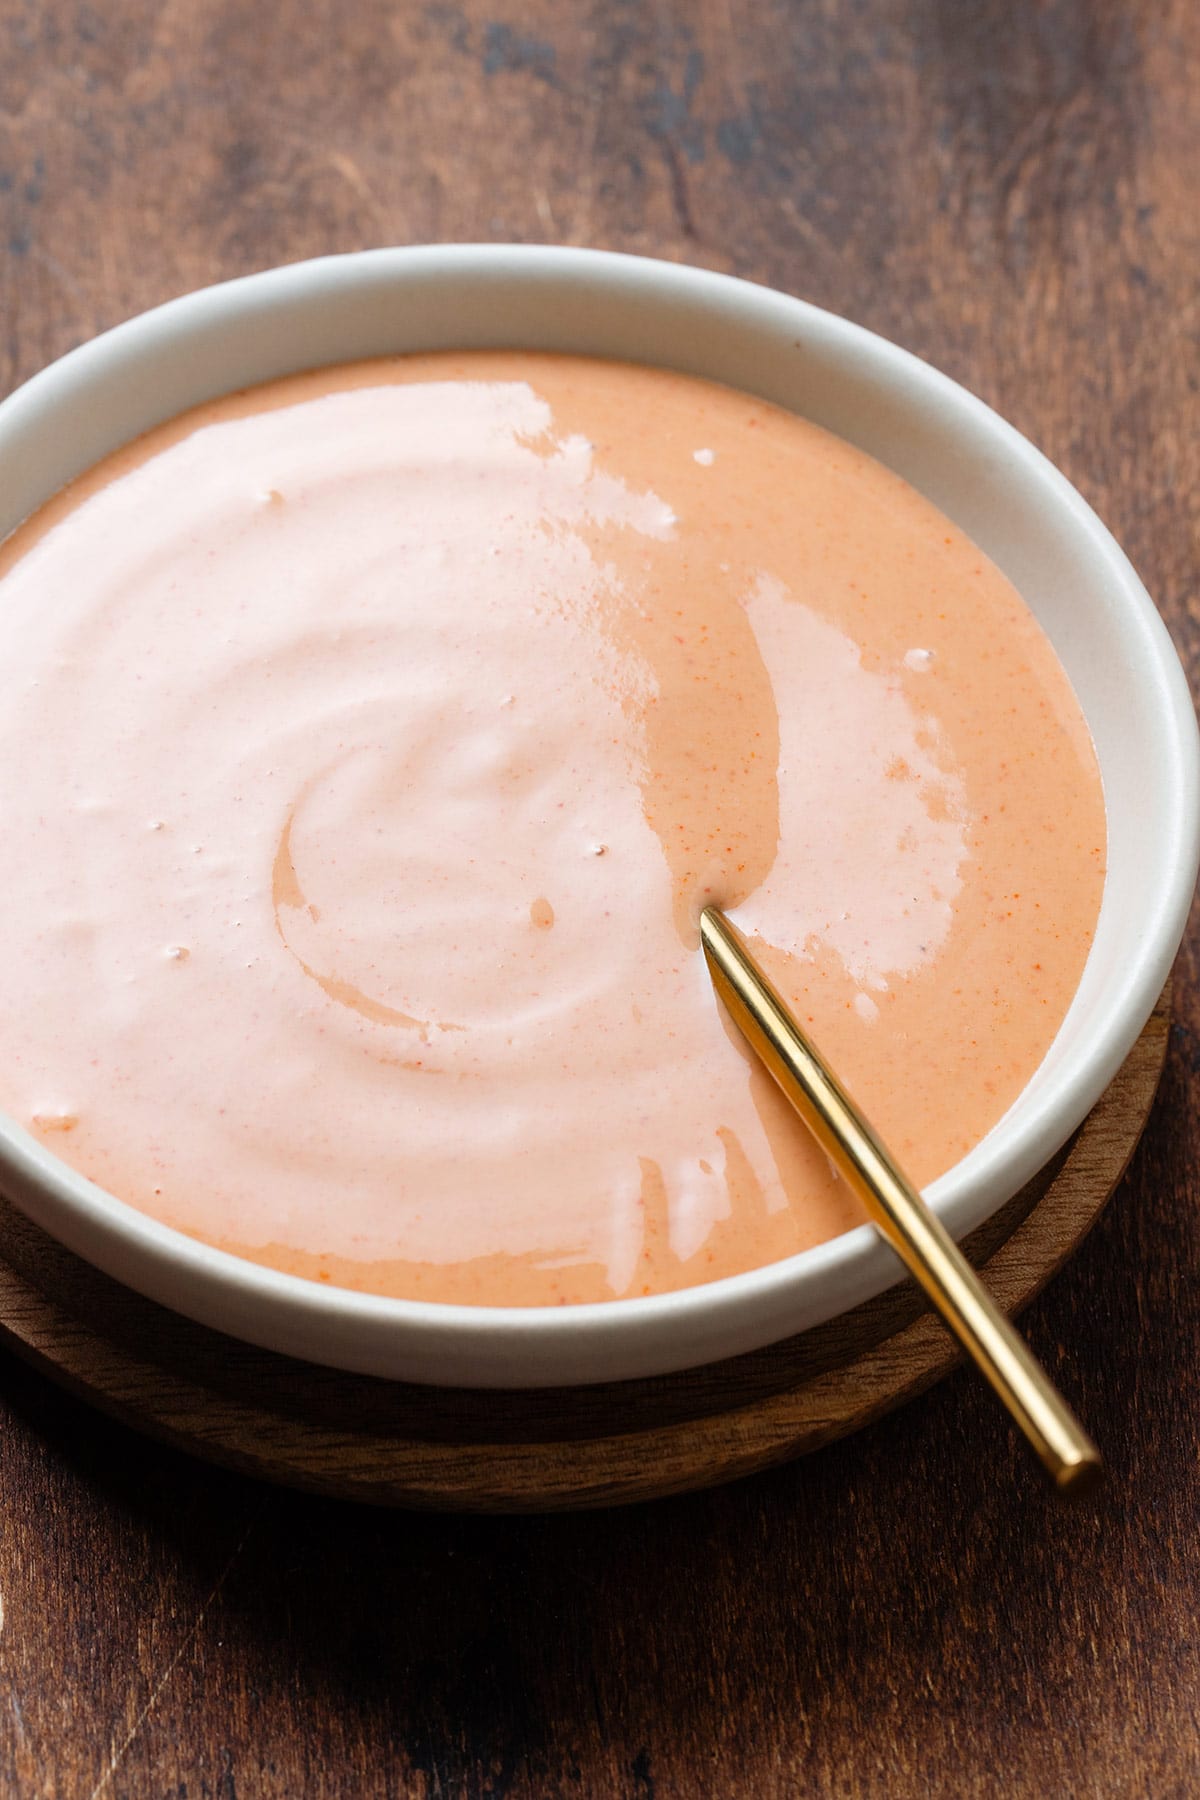 Creamy orange-colored house sauce in white bowl with a gold spoon on a dark wooden background.